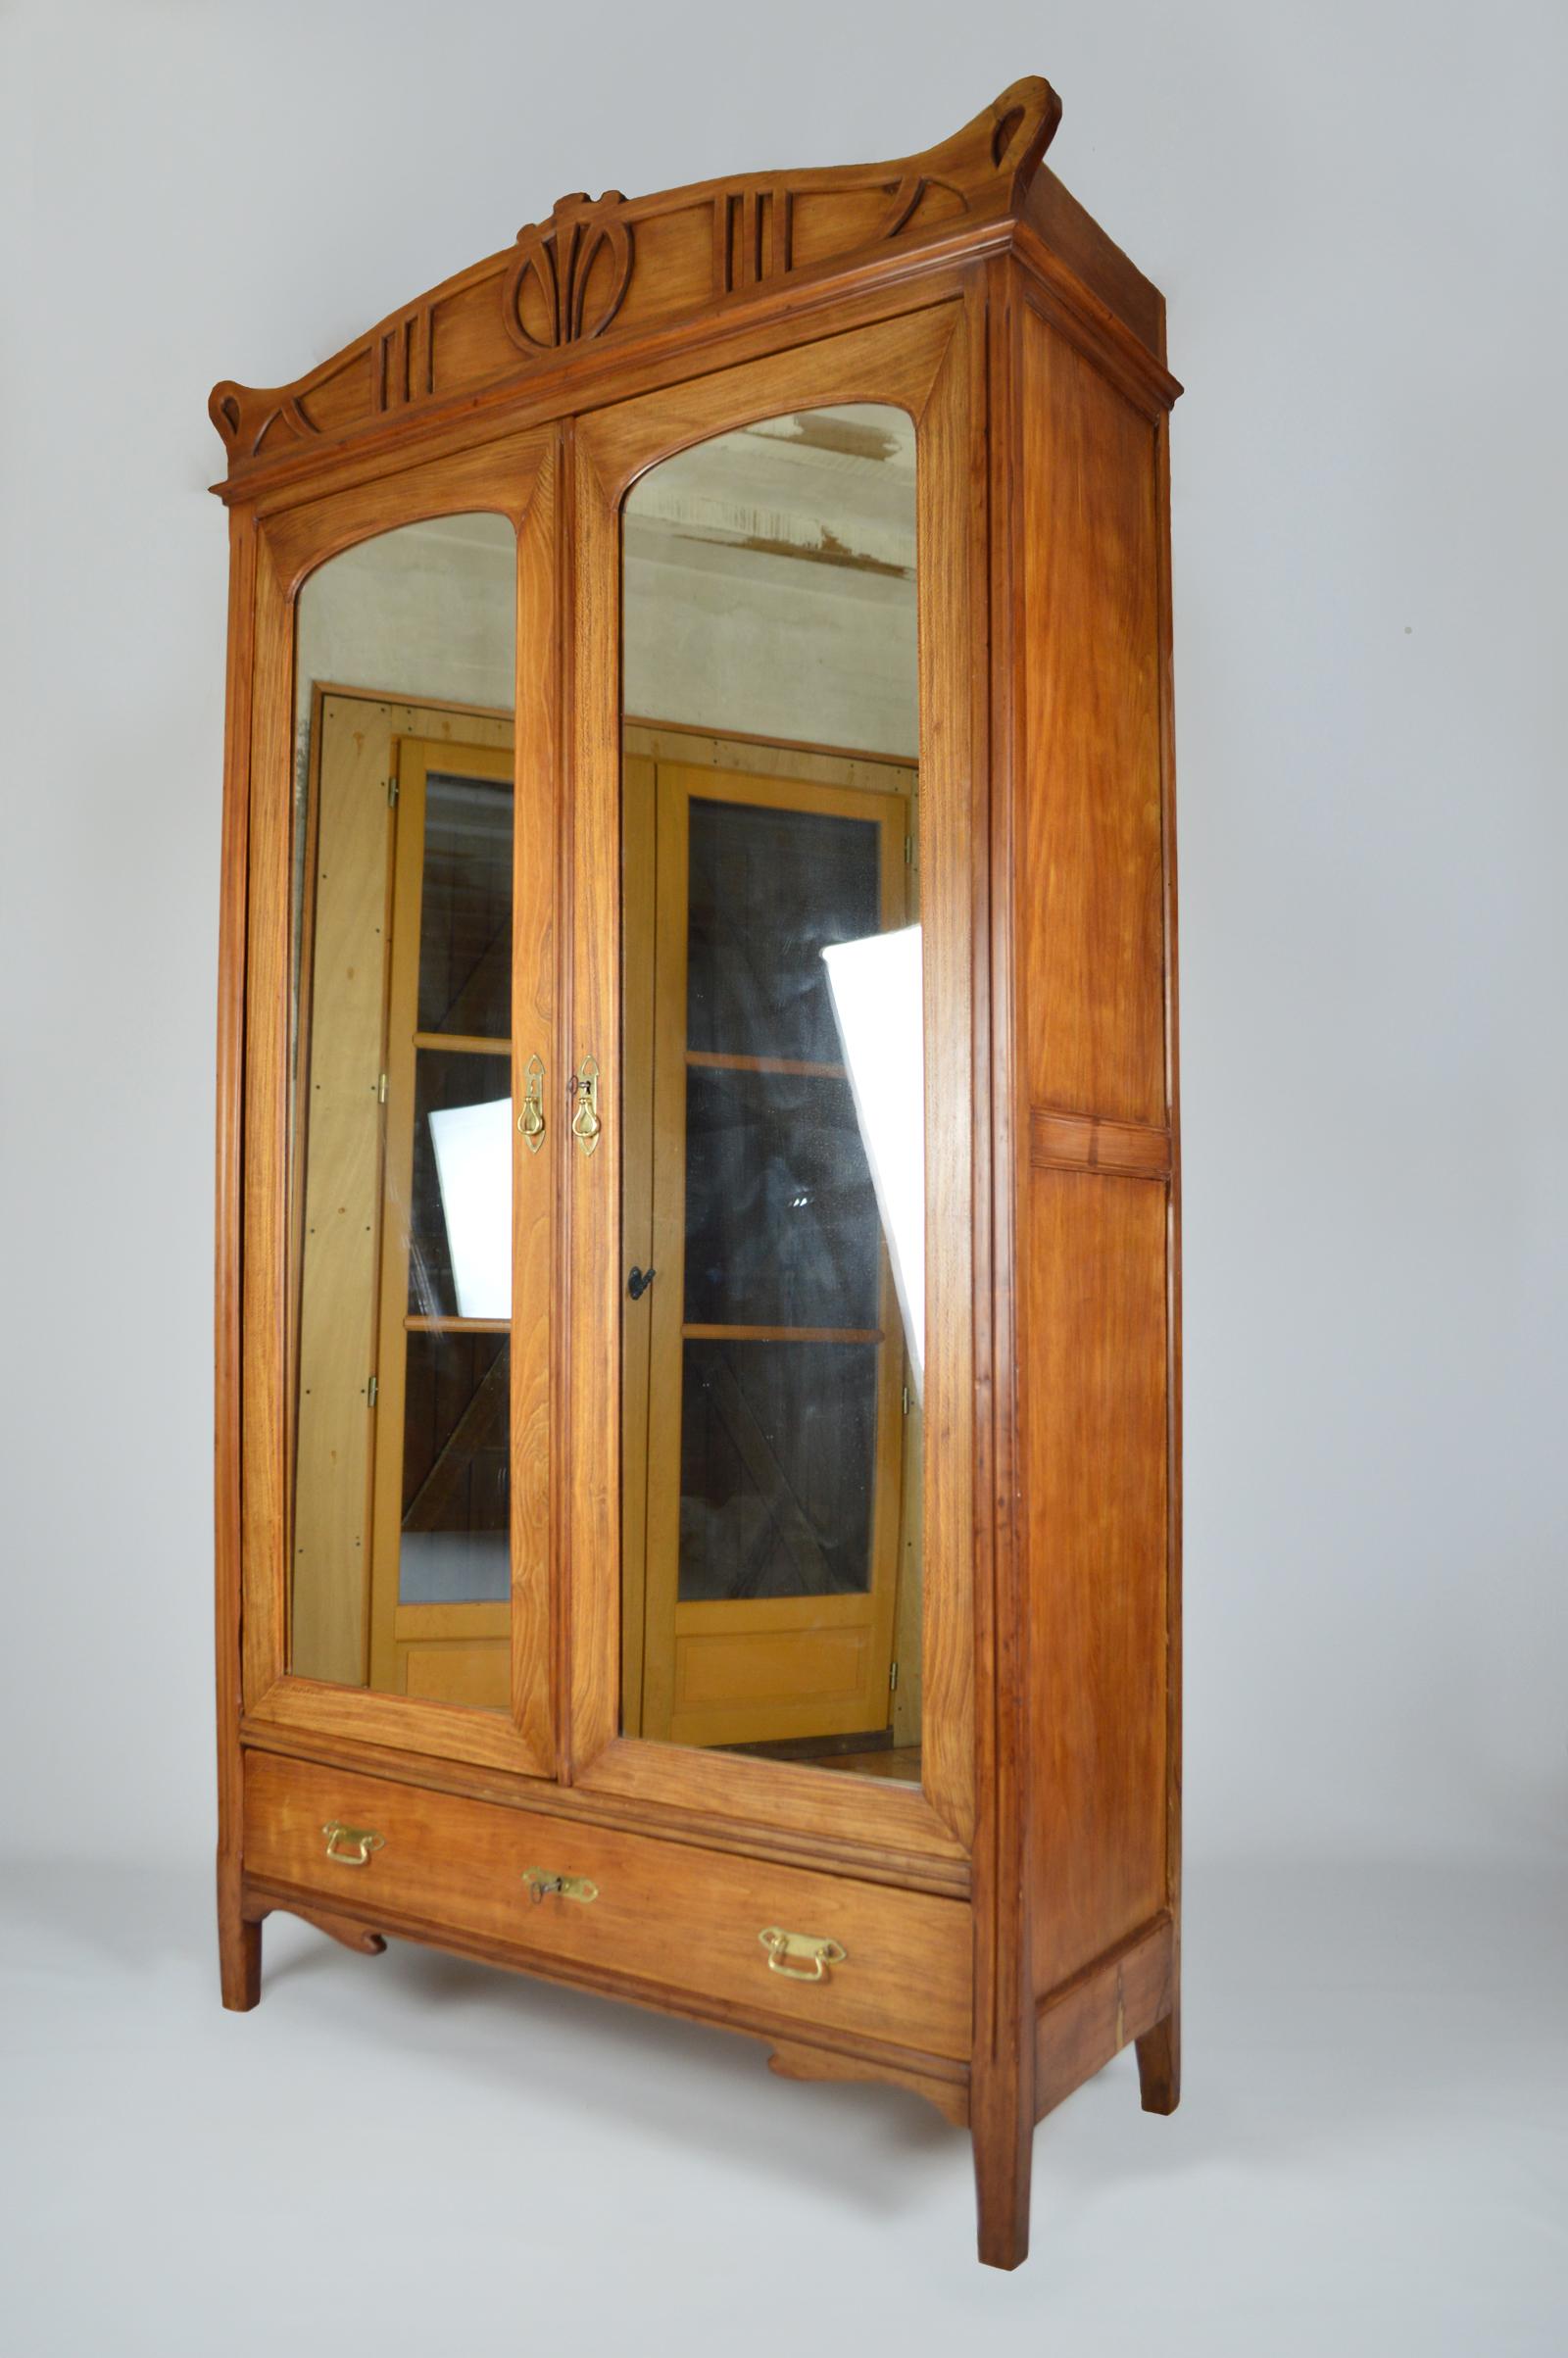 French Art Nouveau Wardrobe / Armoire in Carved Fruit Wood, France, circa 1910